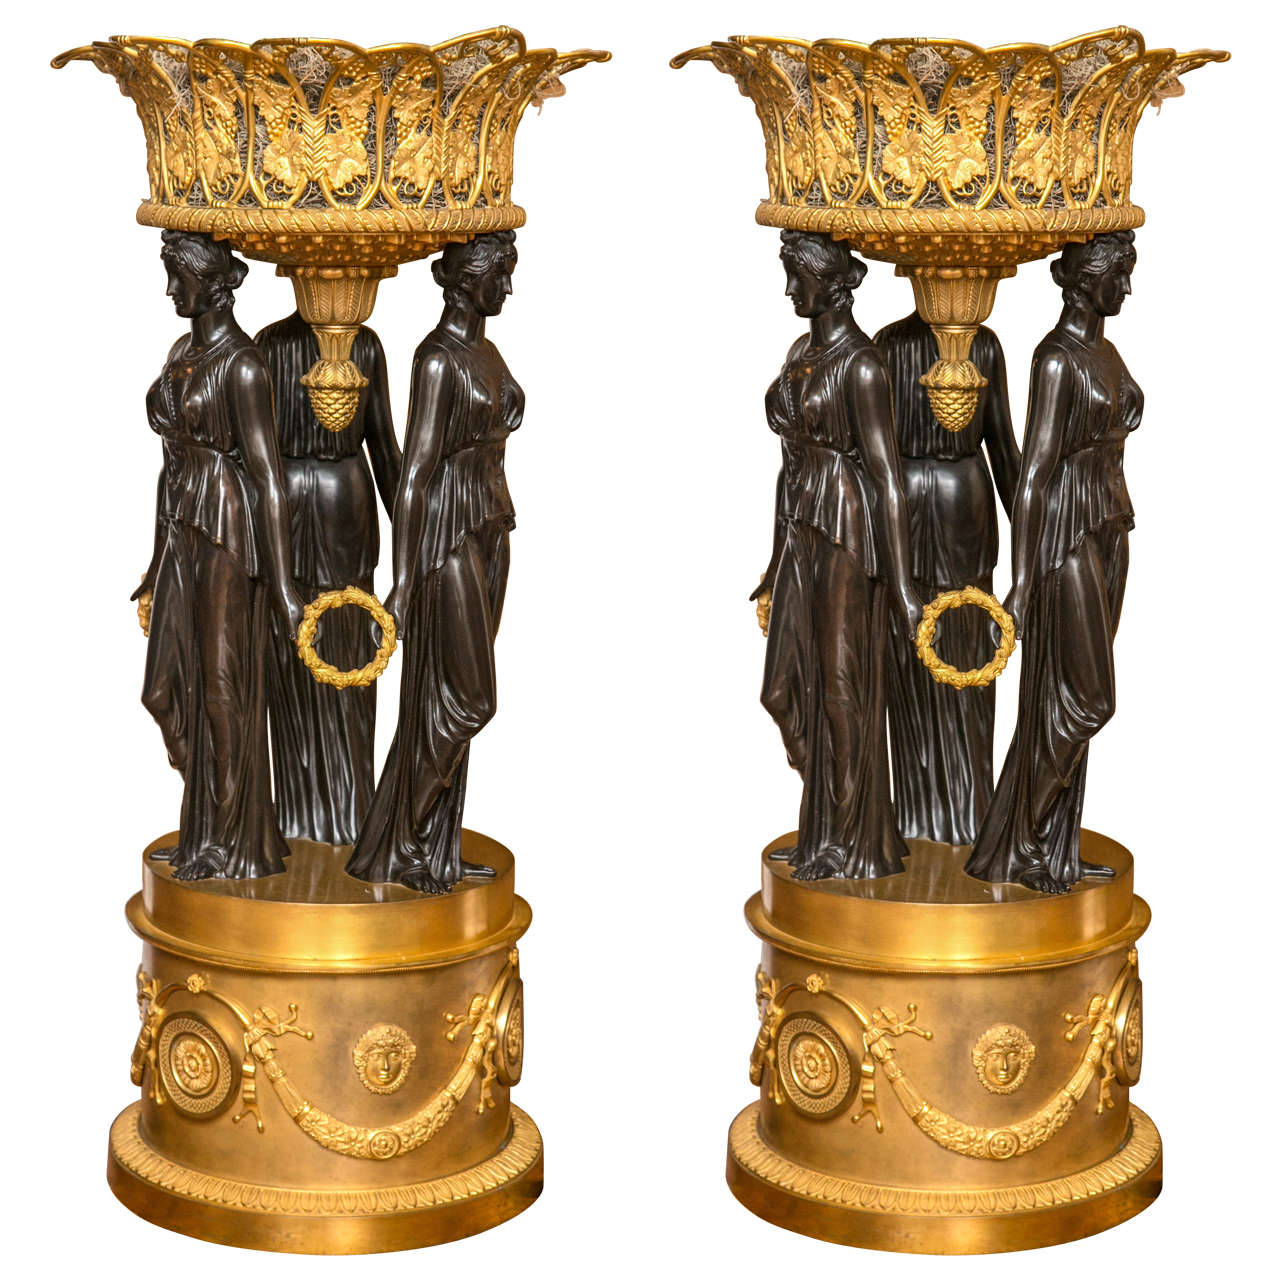 Pair of Palatial Antique Doré and Patented Bronze Figural Planters